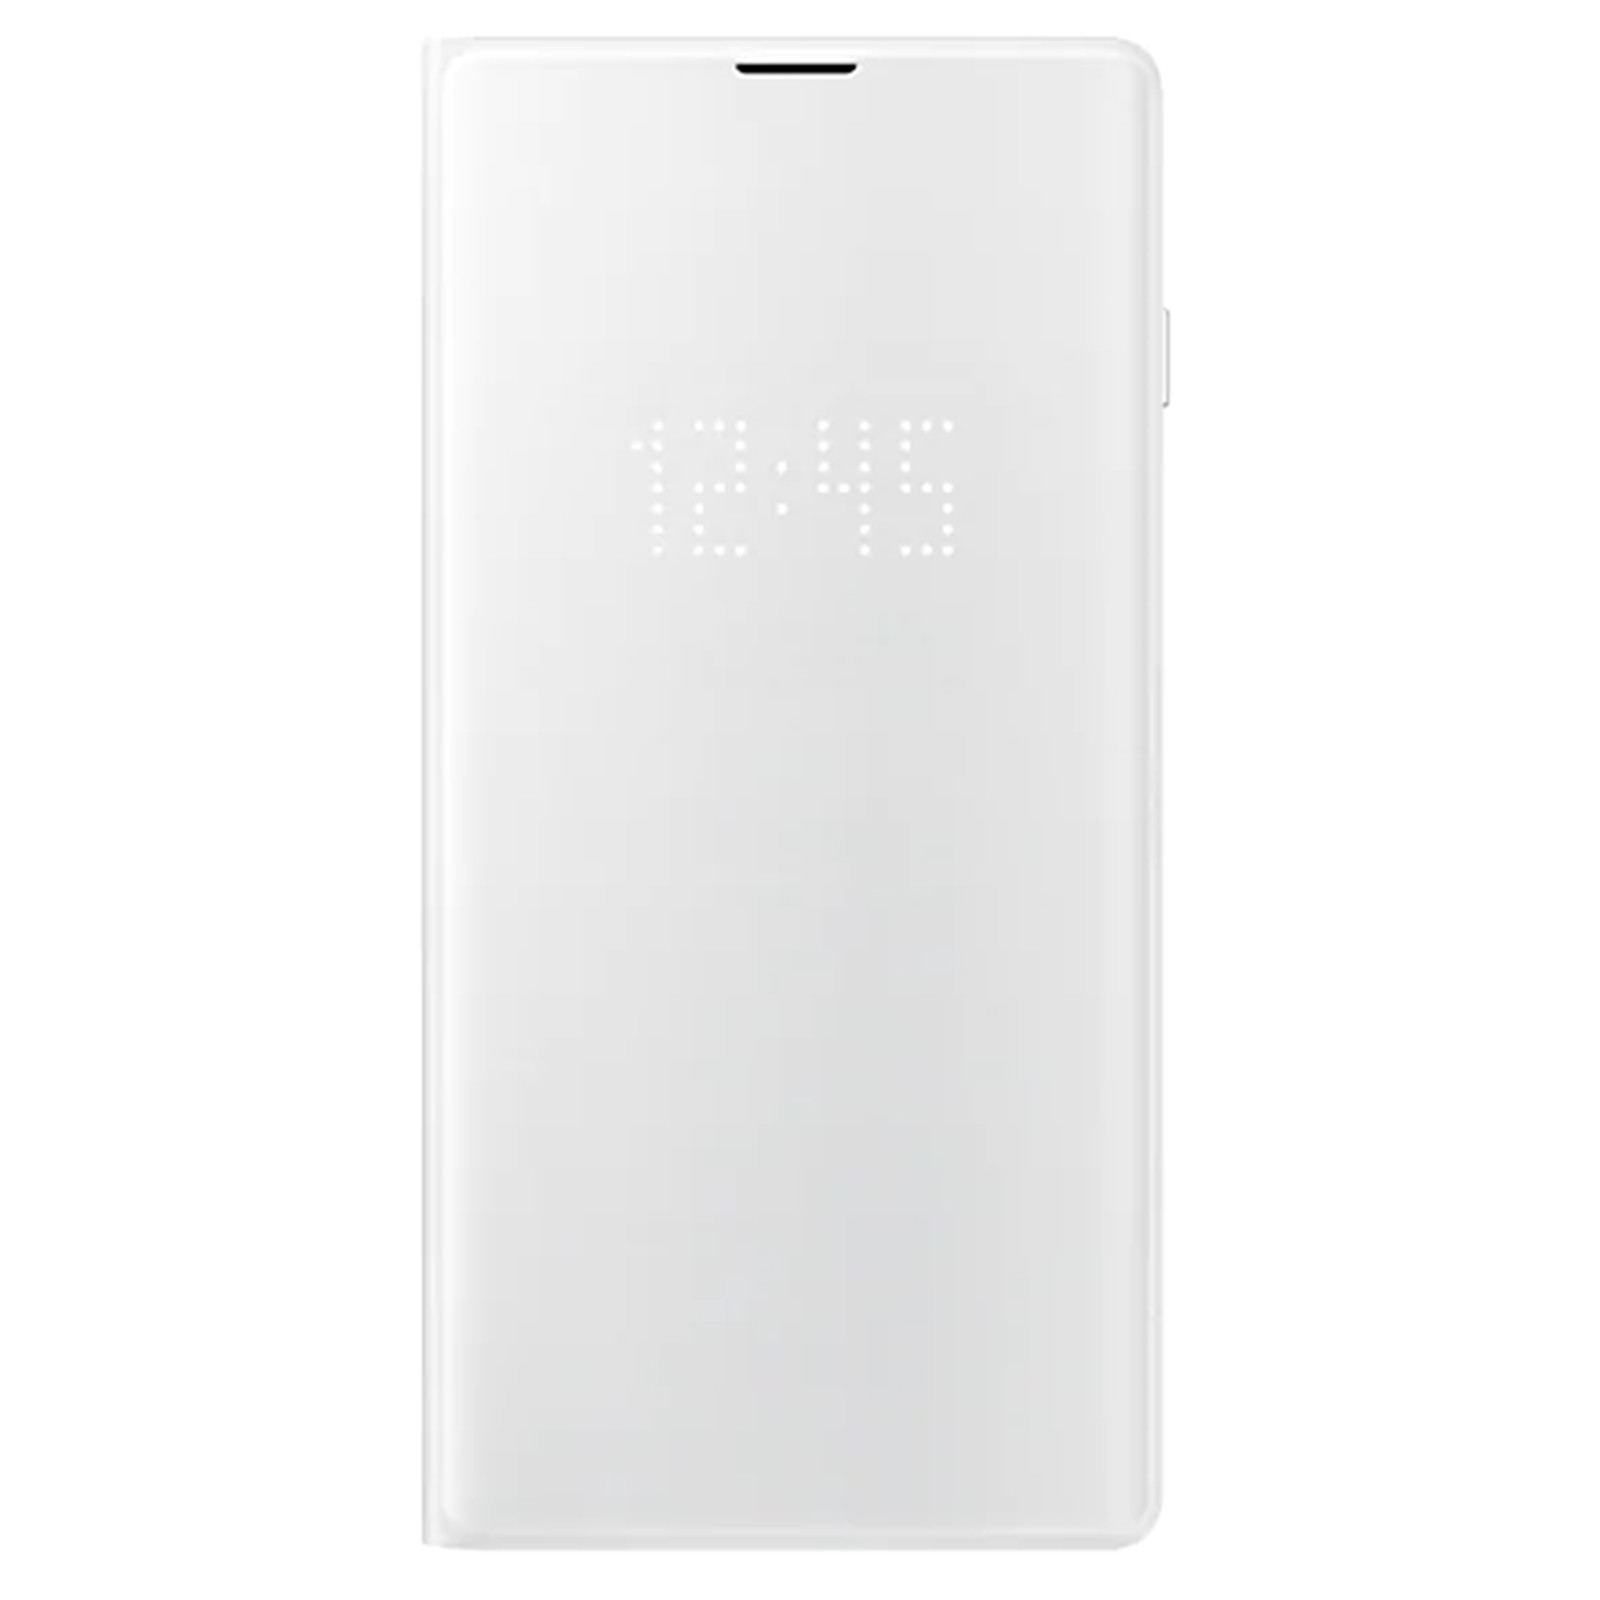 Buy the Samsung Galaxy S10 LED View Flip Cover- White,Light Alerts,LED  Display... ( EF-NG973PWEGWW ) online - PBTech.com